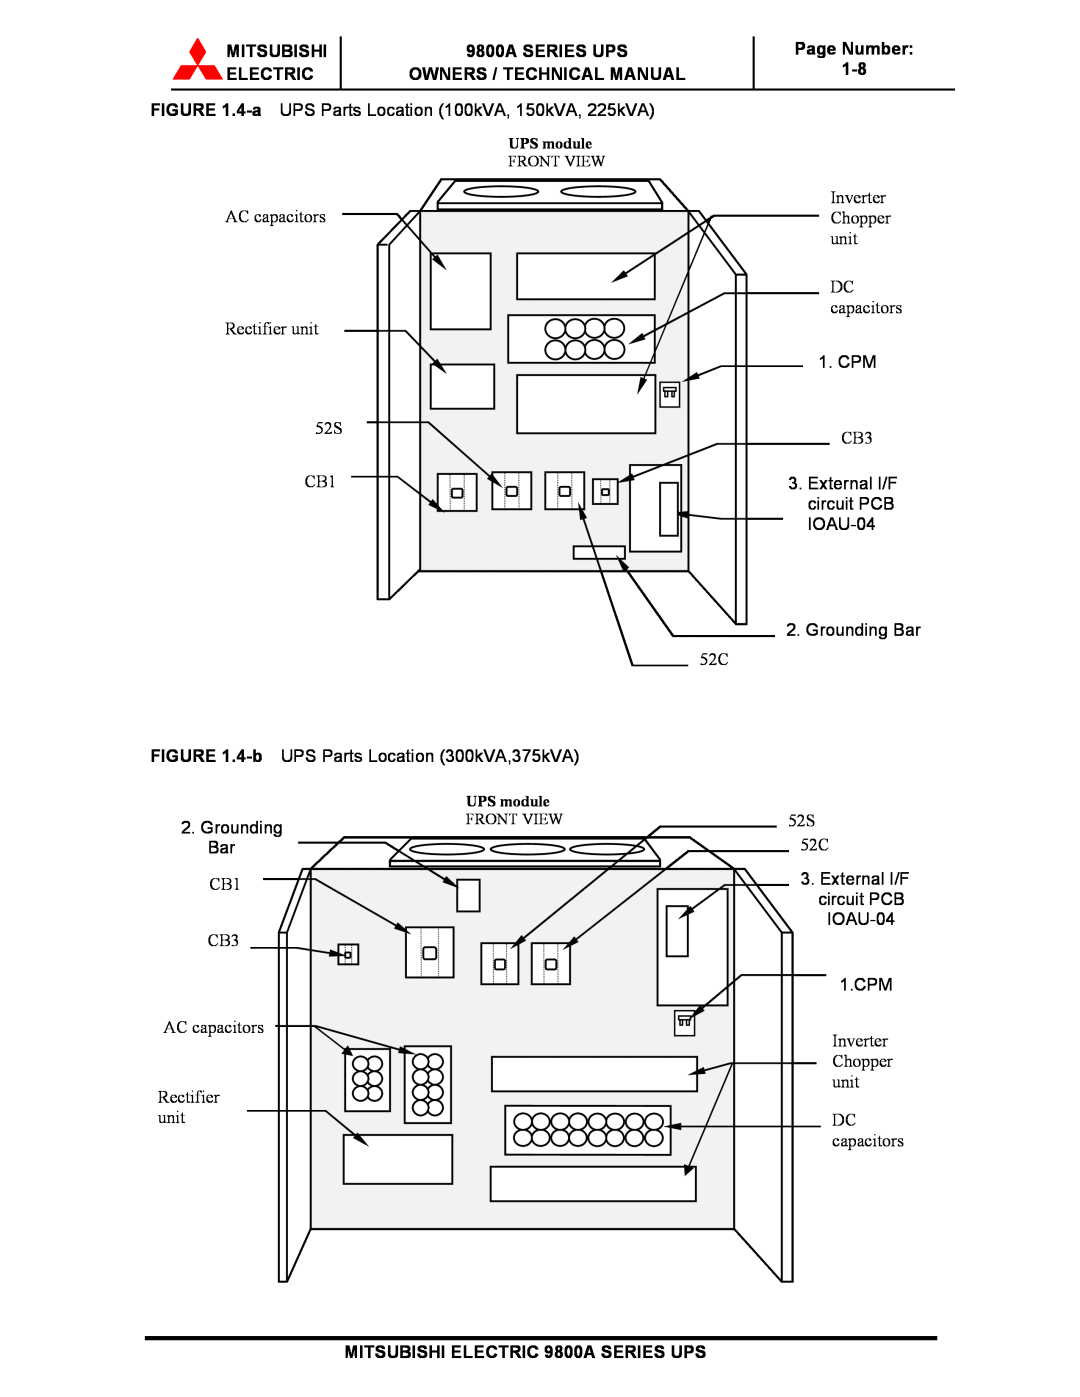 Mitsubishi 9800A Series technical manual Mitsubishi Electric, 9800A SERIES UPS OWNERS / TECHNICAL MANUAL, Page Number 1-8 